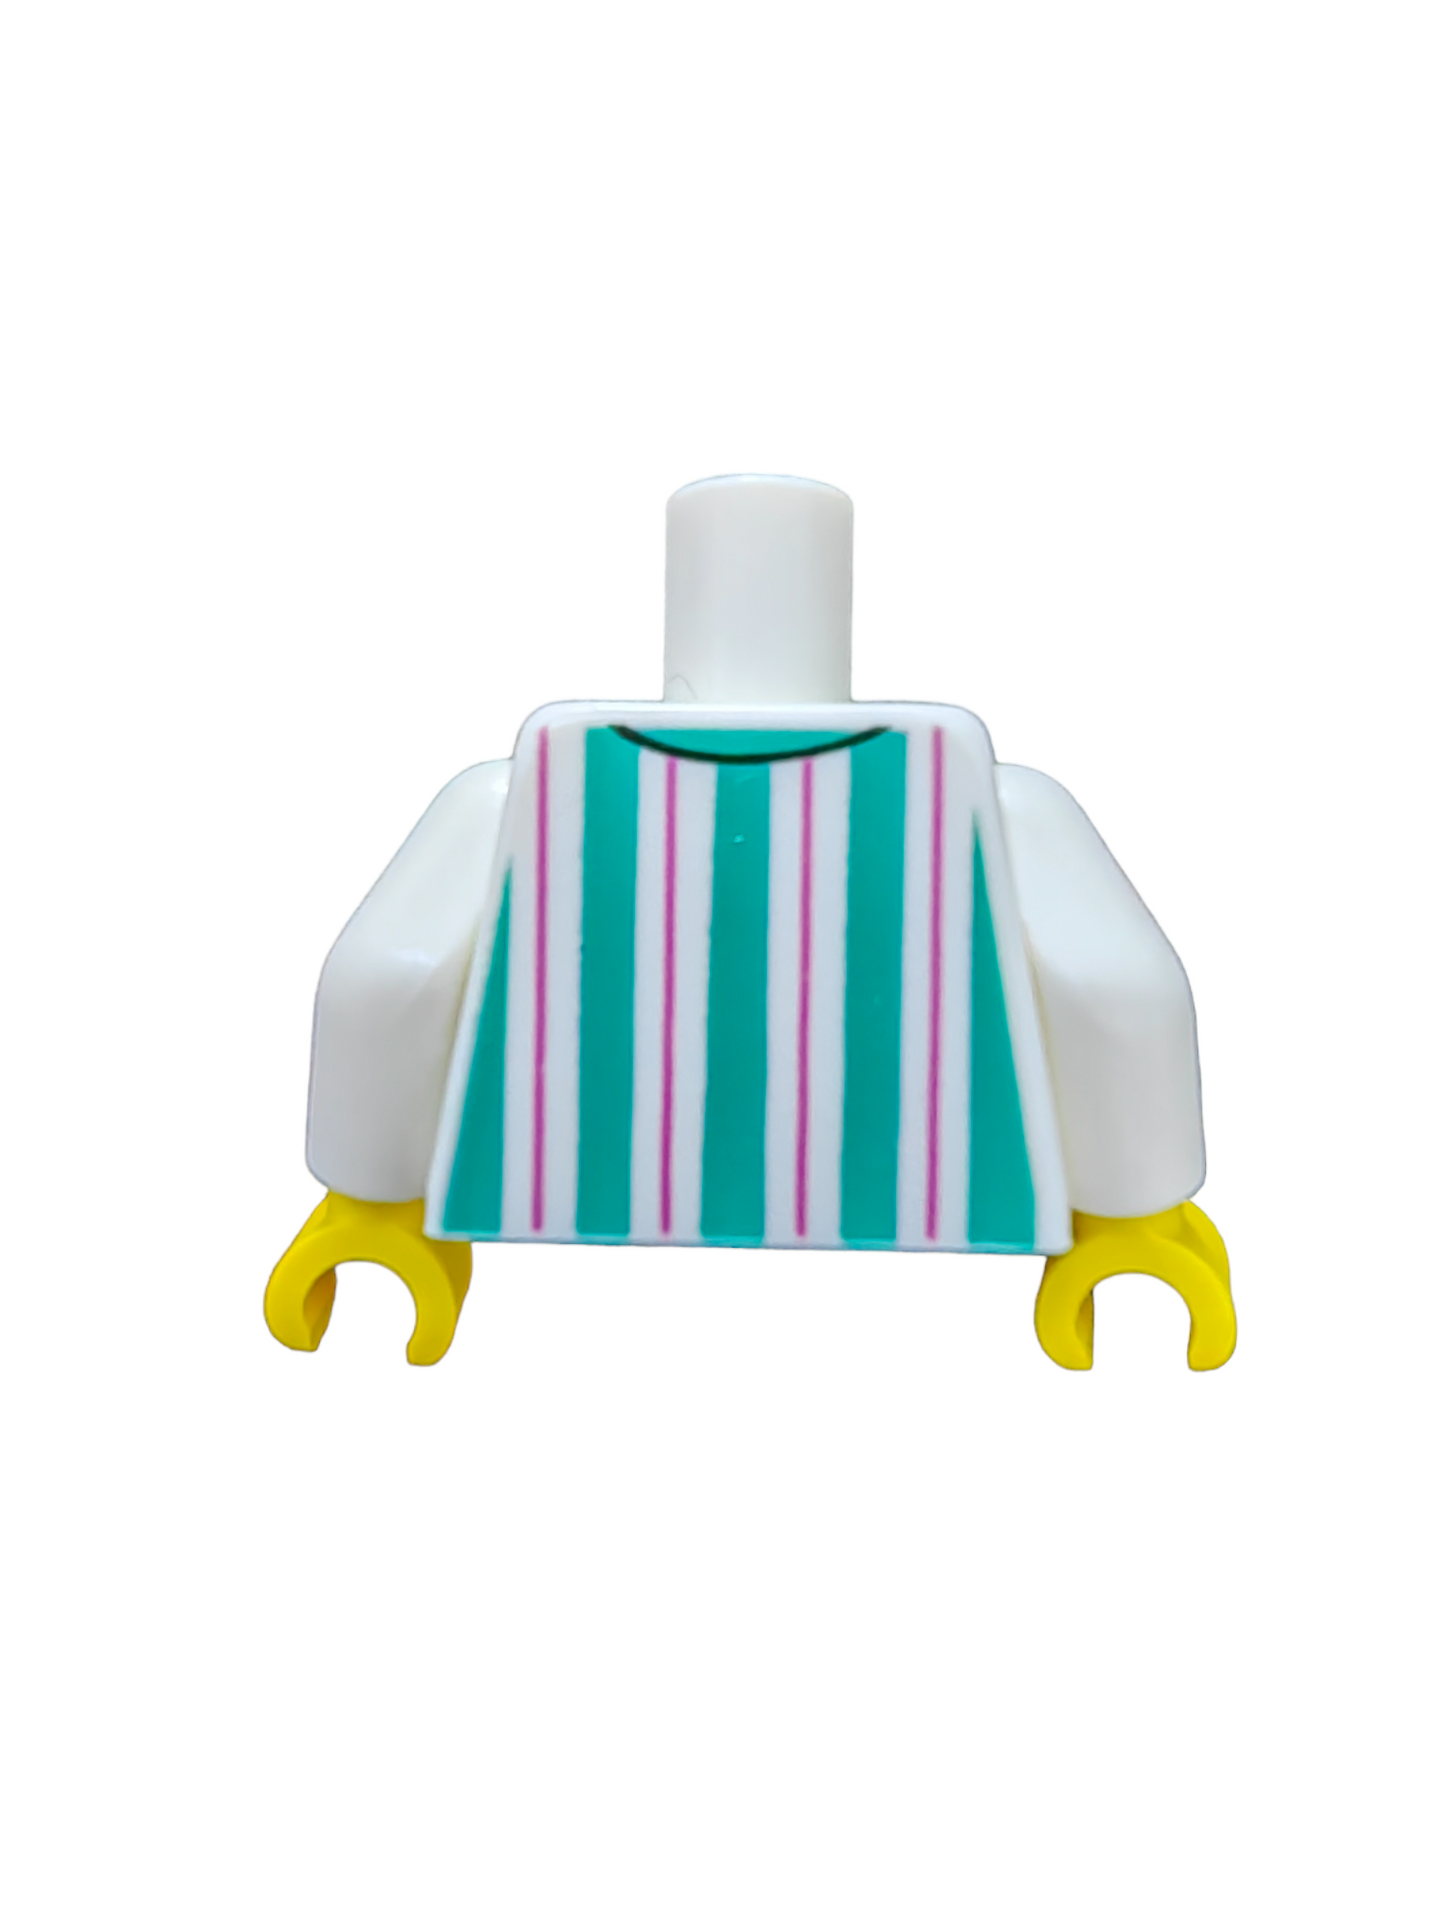 LEGO Torso, White Shirt with Turquoise and Pink Vertical Stripes - UB1124